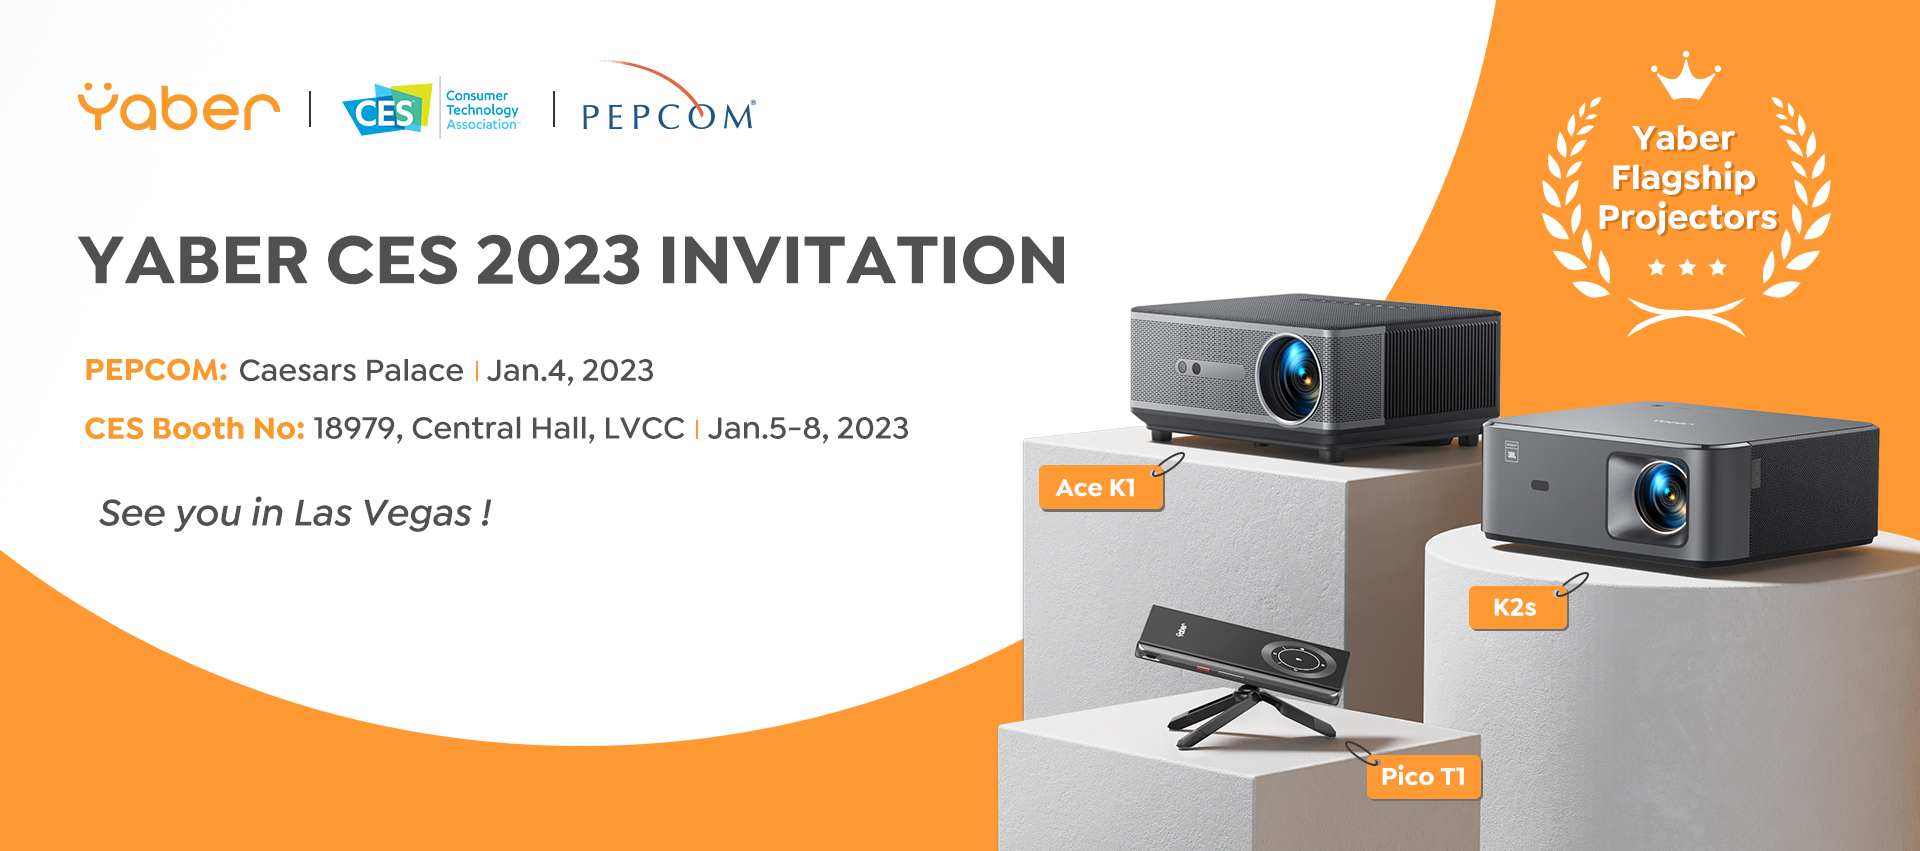 CES 2023: Yaber Entertainment Projector - News Releases